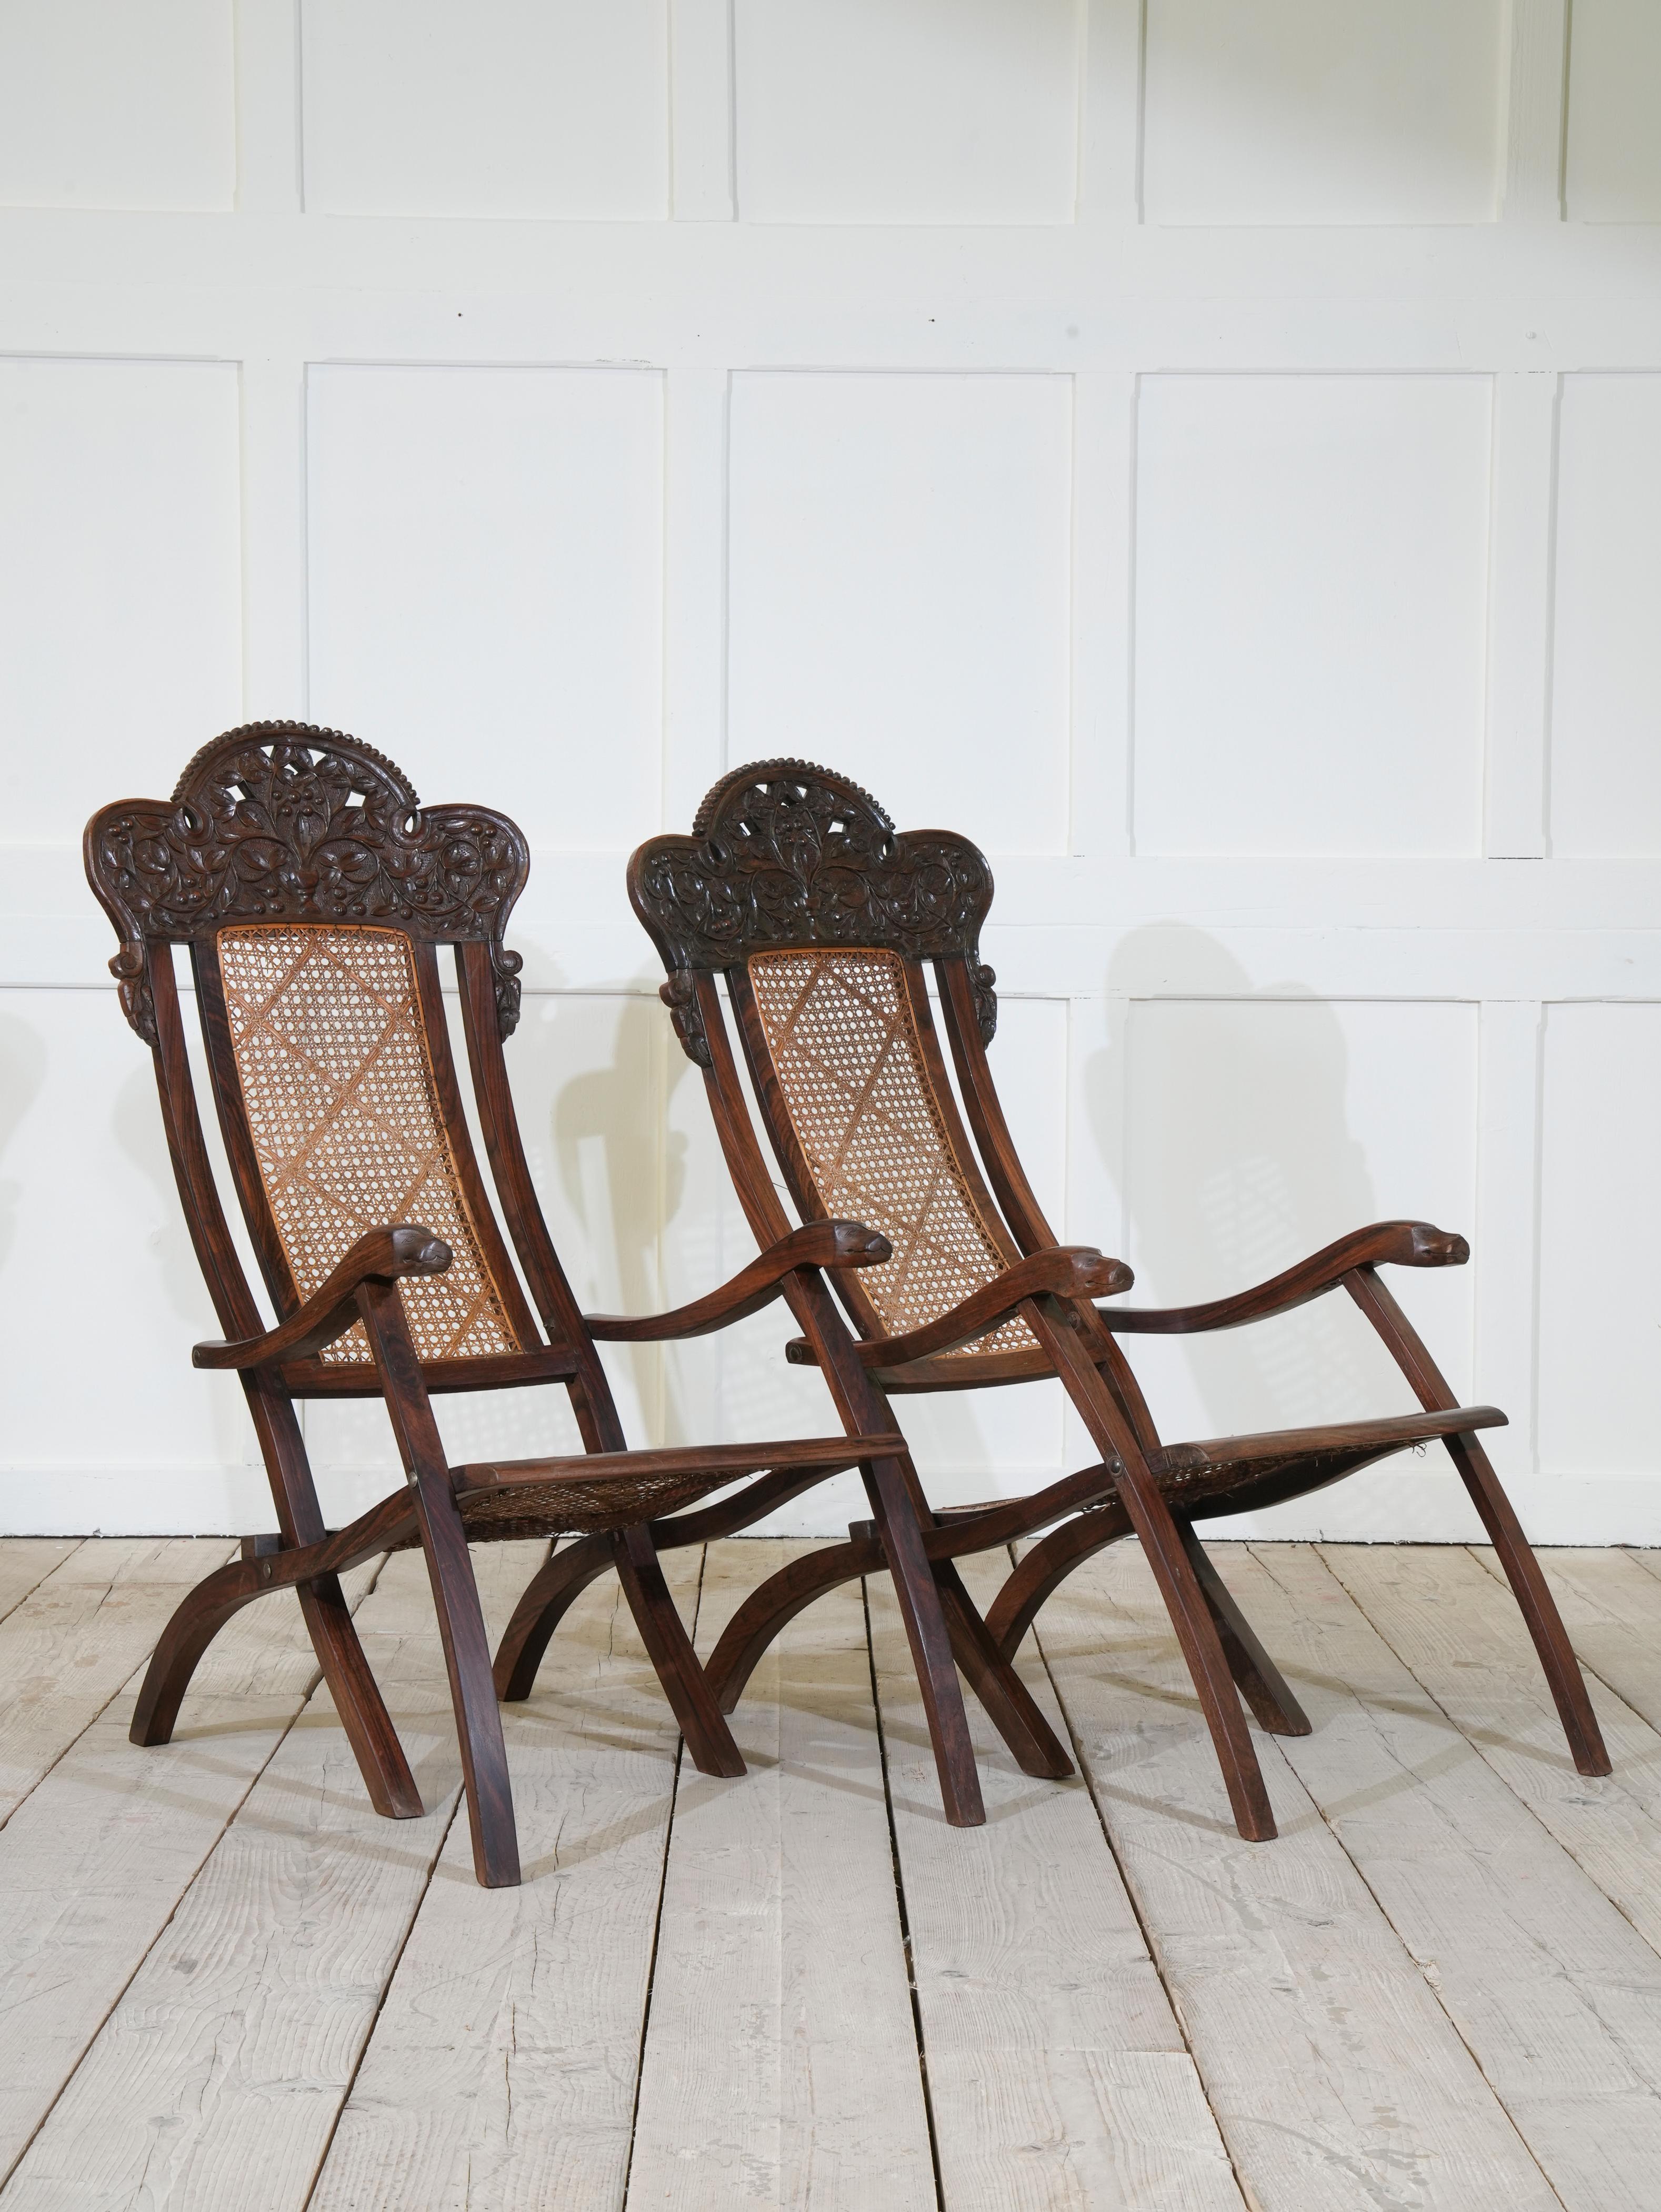 Carved Pair of Indian Caned Mahogany Folding Conservatory Chairs